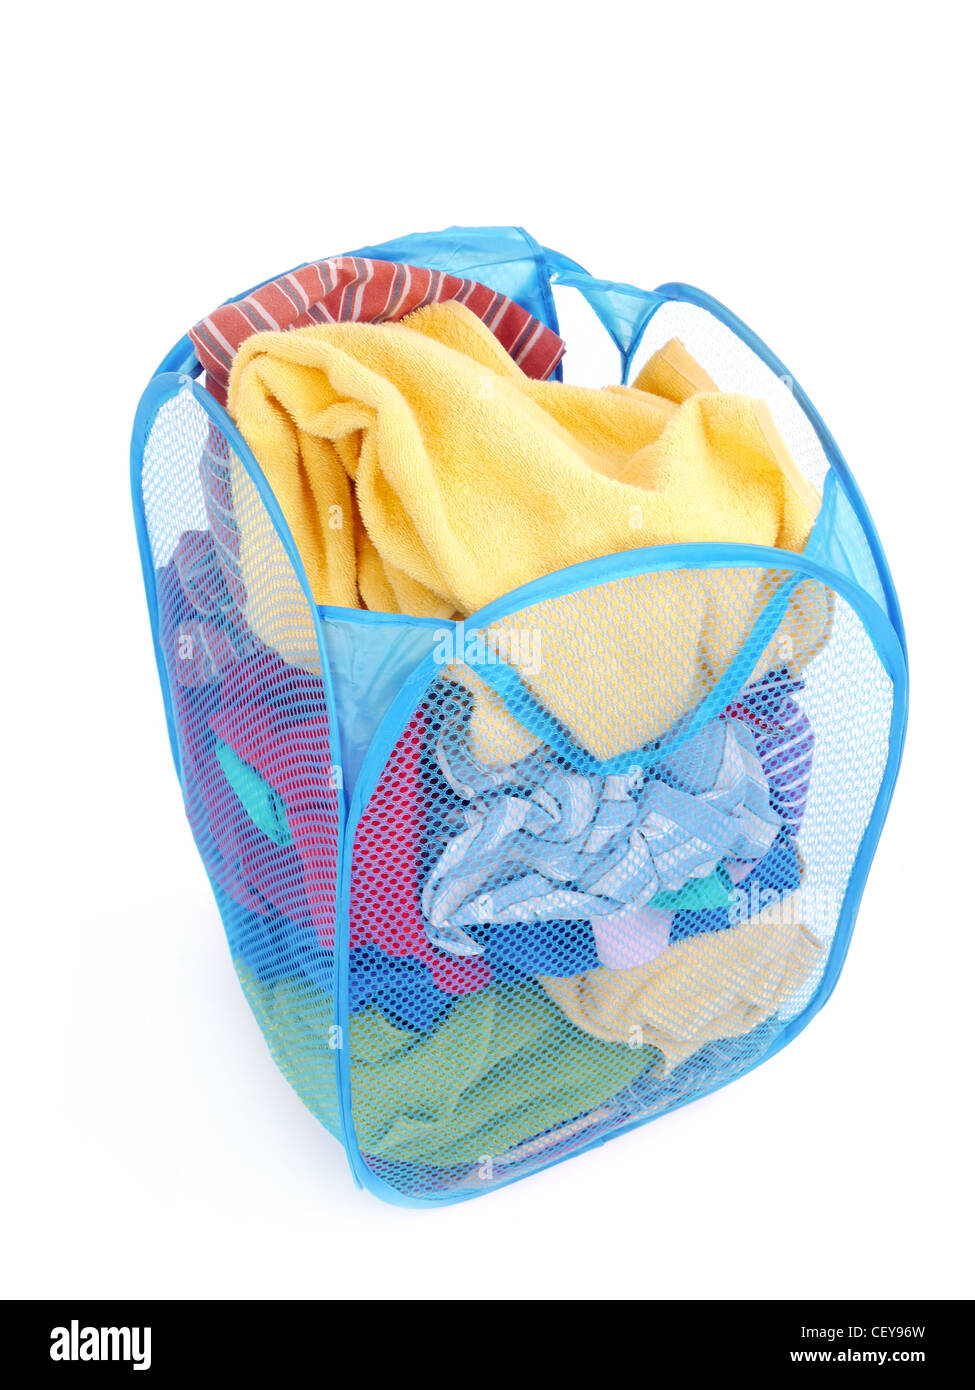 Dirty clothes in blue woven laundry basket on white background Stock Photo